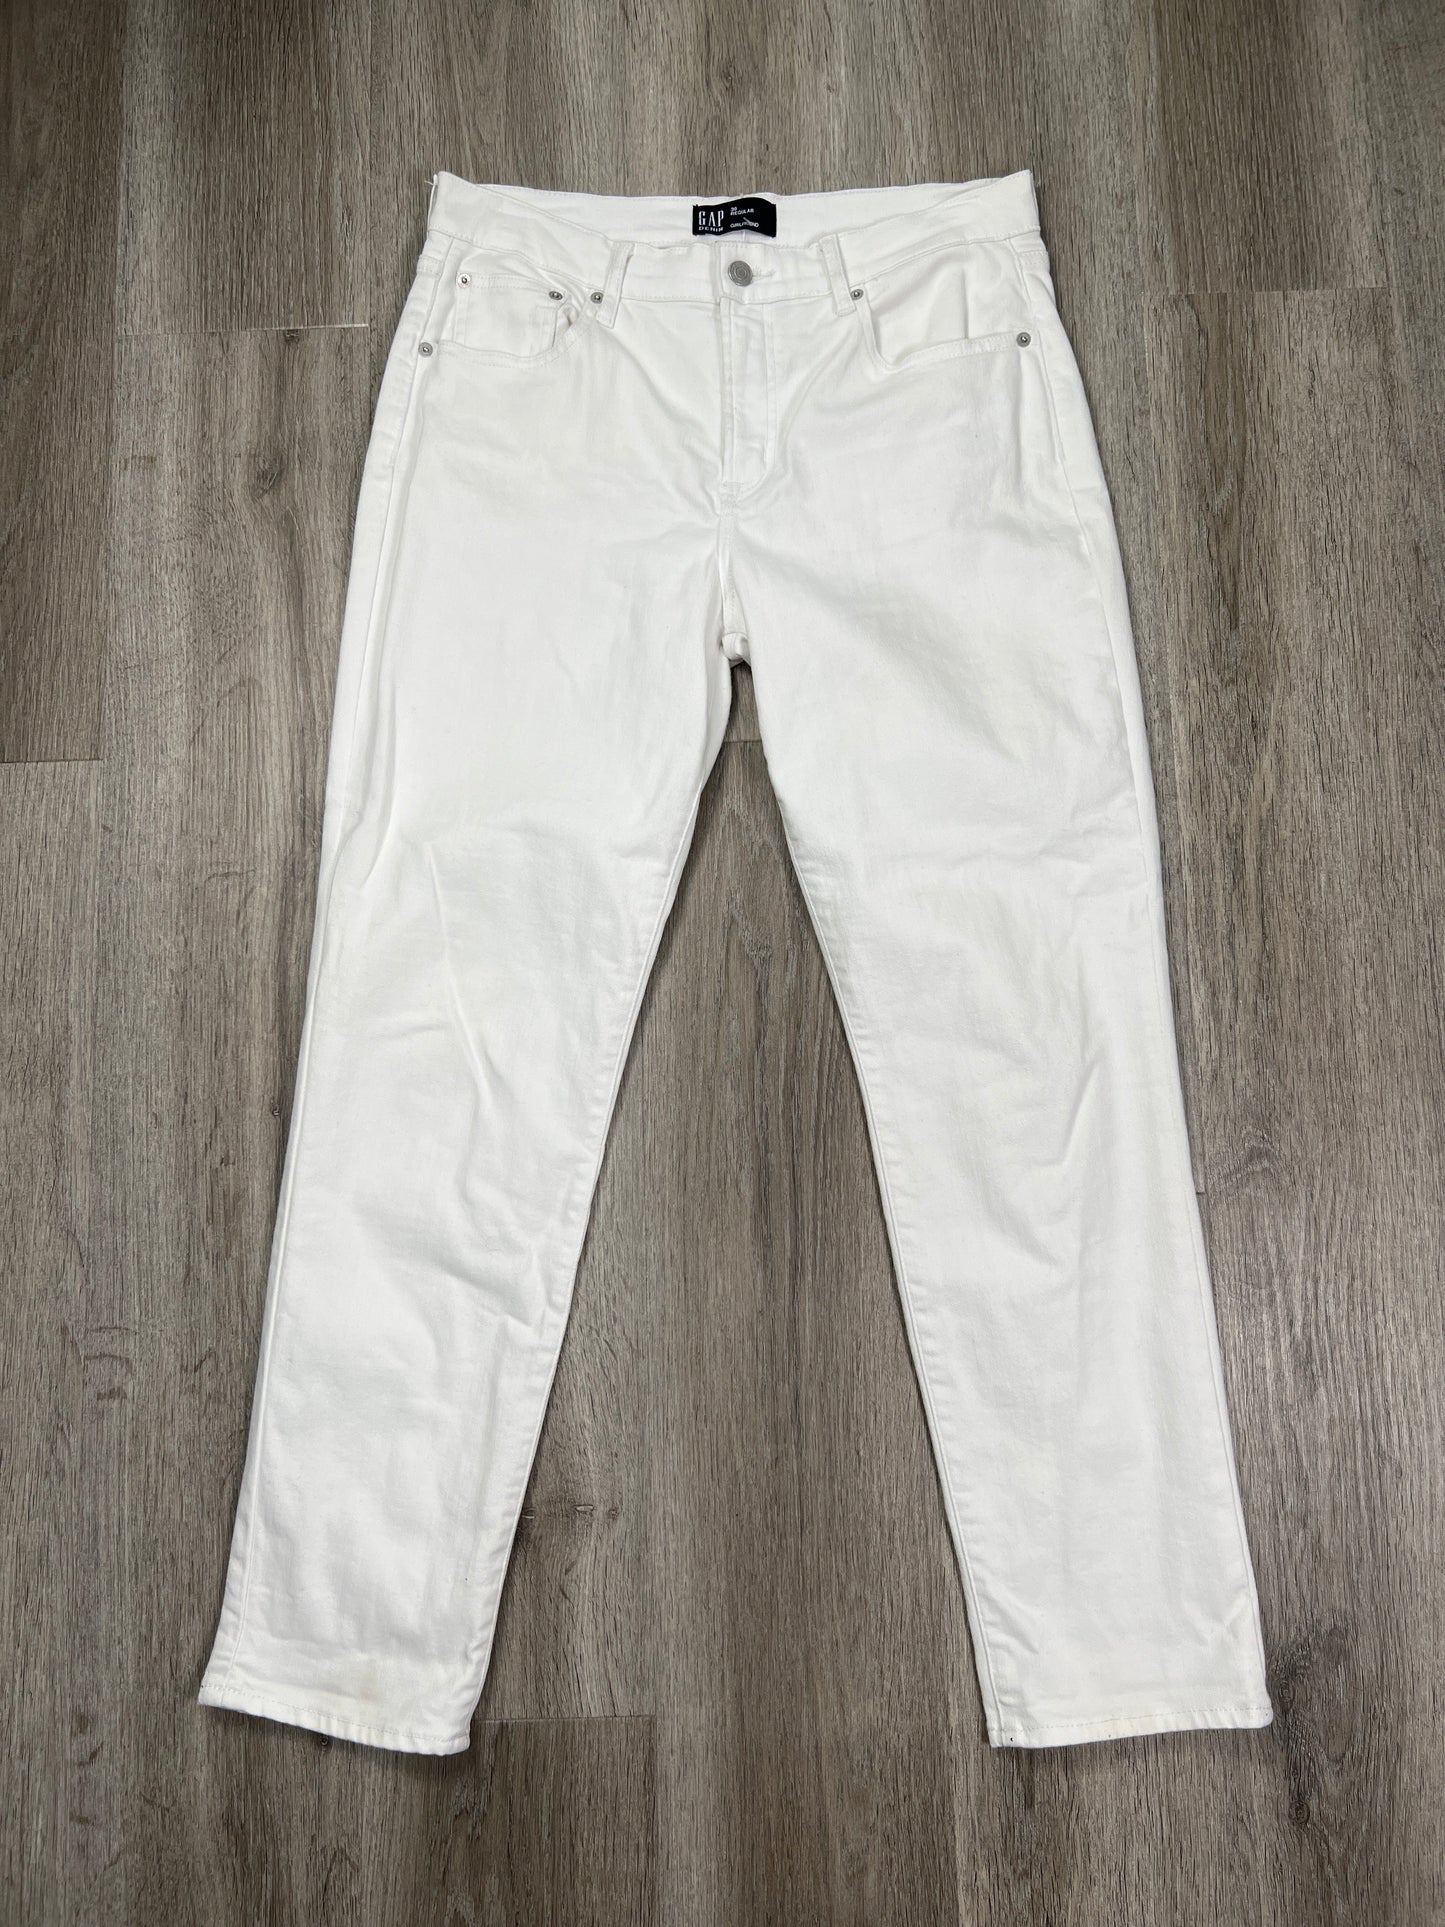 White Jeans Straight Gap, Size 8